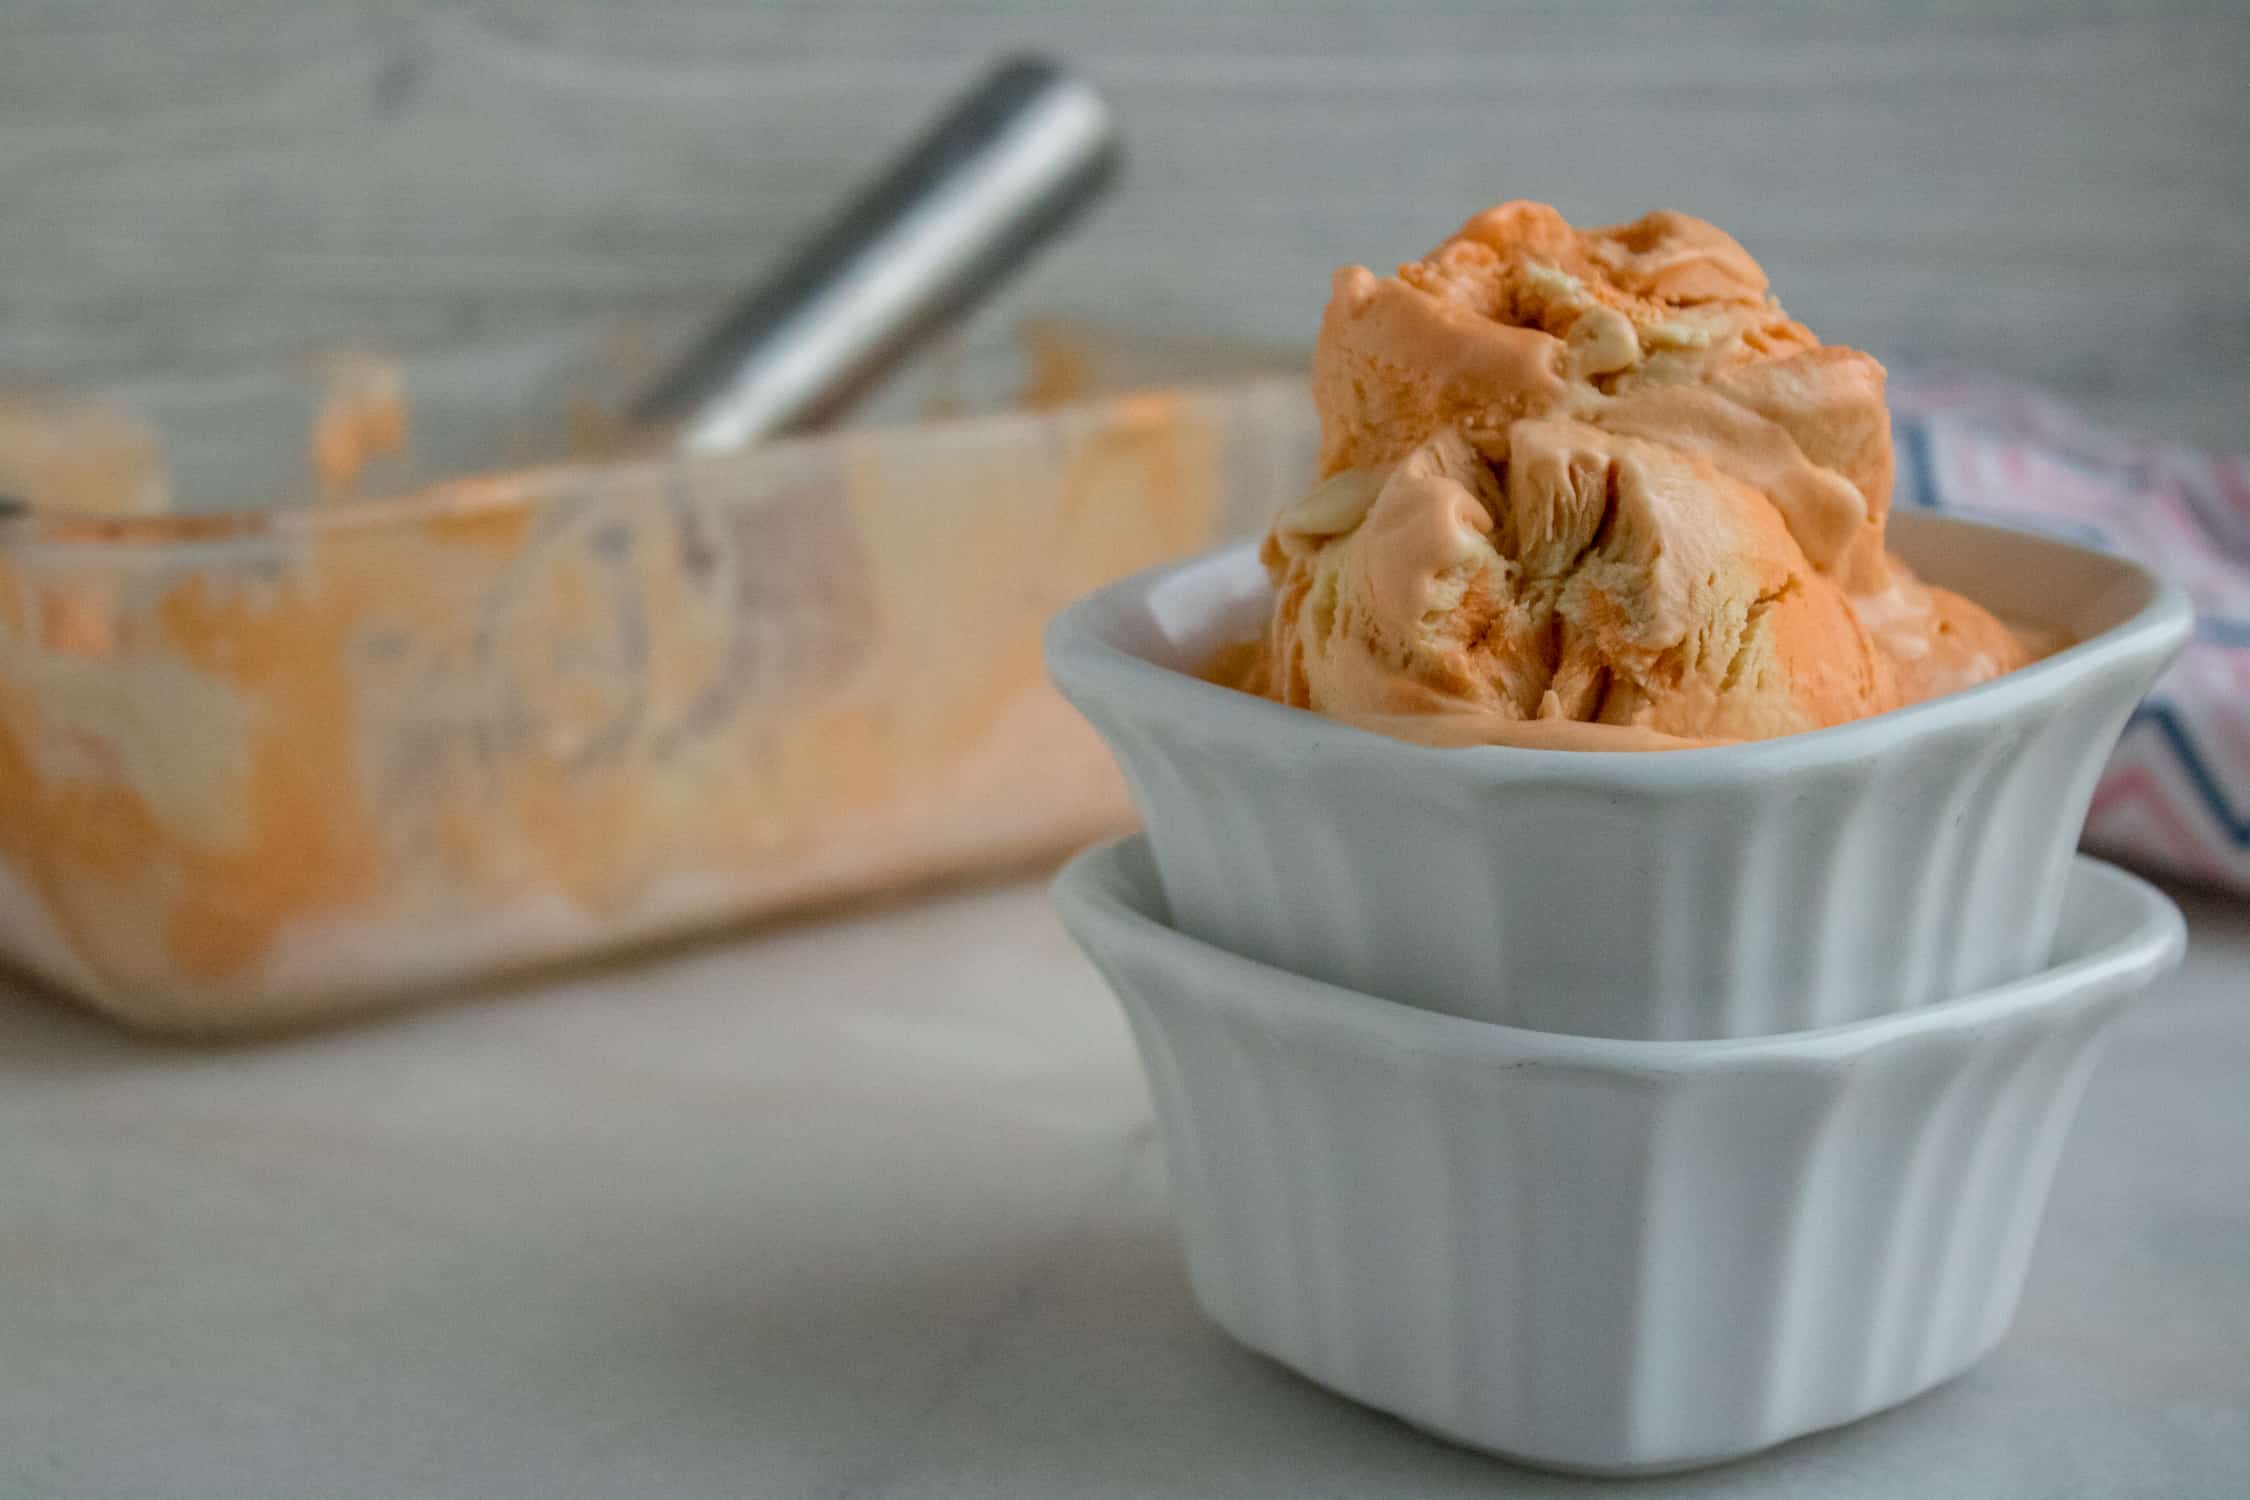 Glass container of Orange Creamsicle No-Churn Ice Cream in front of a white square ceramic ramekin filled with two scoops of the ice cream